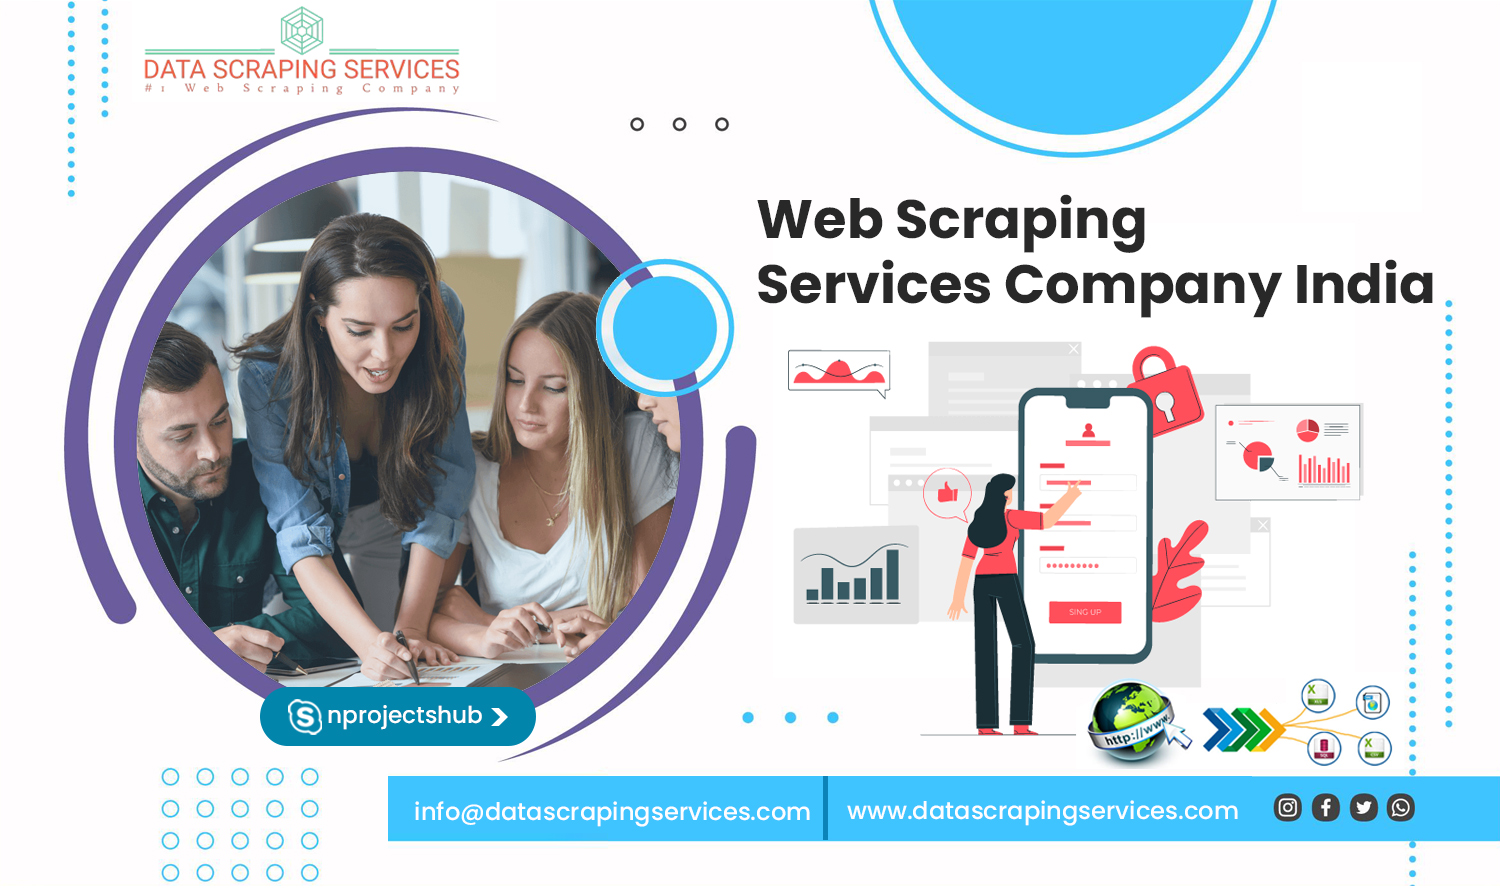 Web Scraping Services Company India